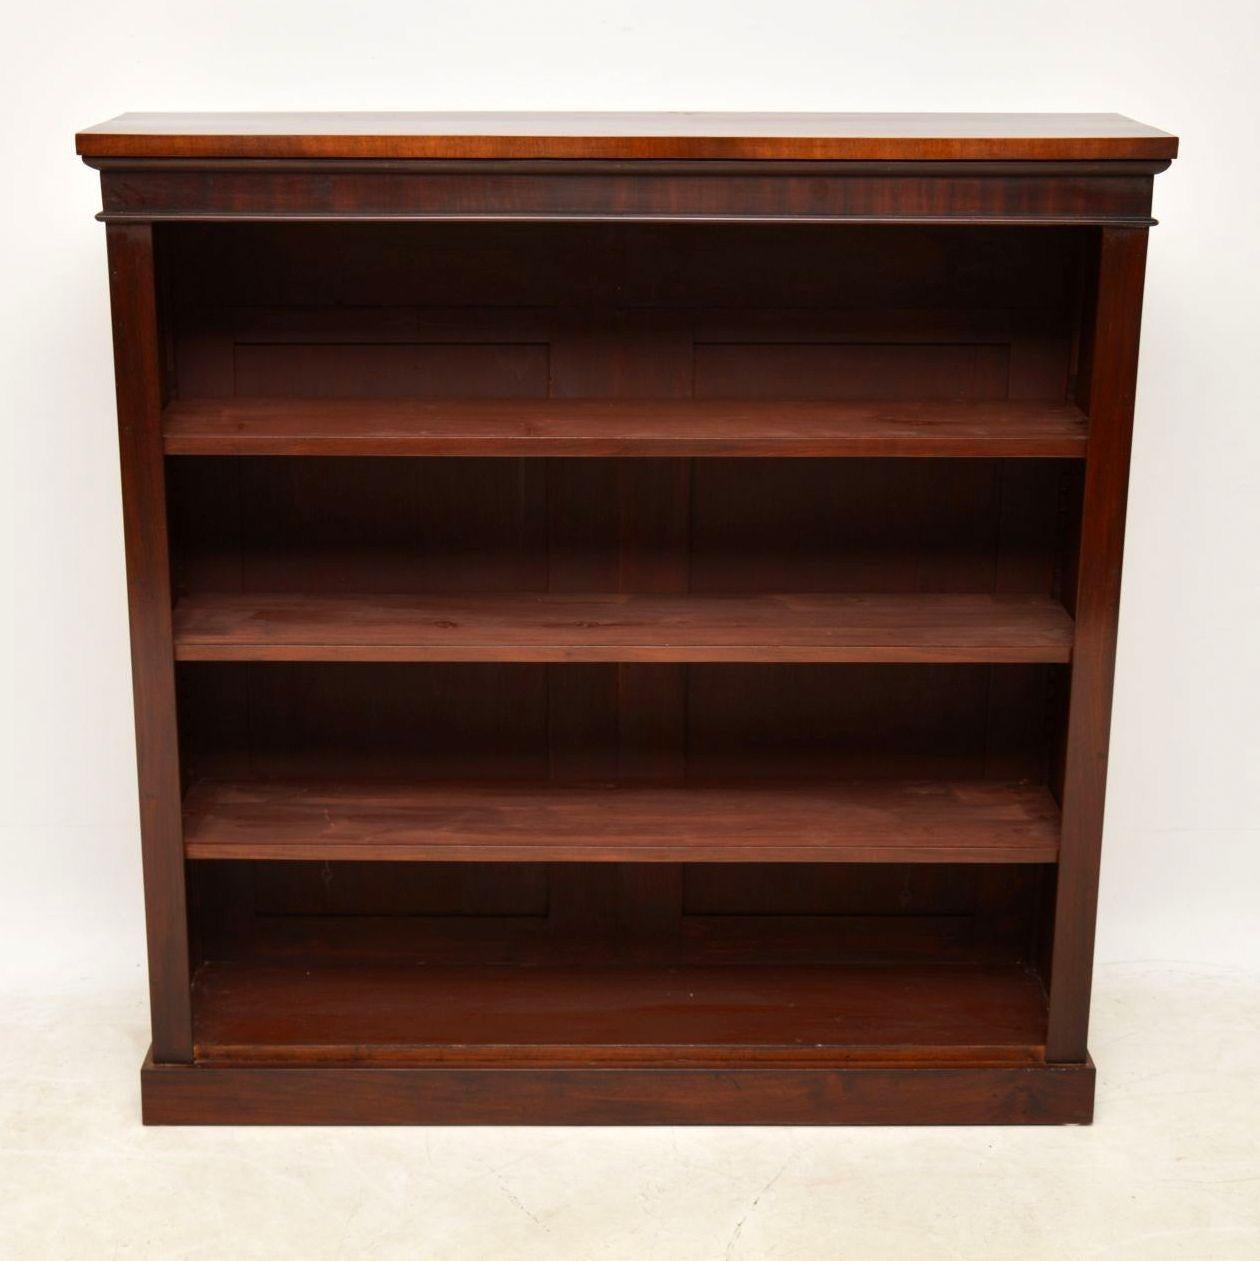 Large antique Victorian solid mahogany open bookcase in excellent condition and dating to around the 1860s period. This bookcase is of high quality and the wood has a lovely nutty brown color. The three shelves are all adjustable on sharks teeth